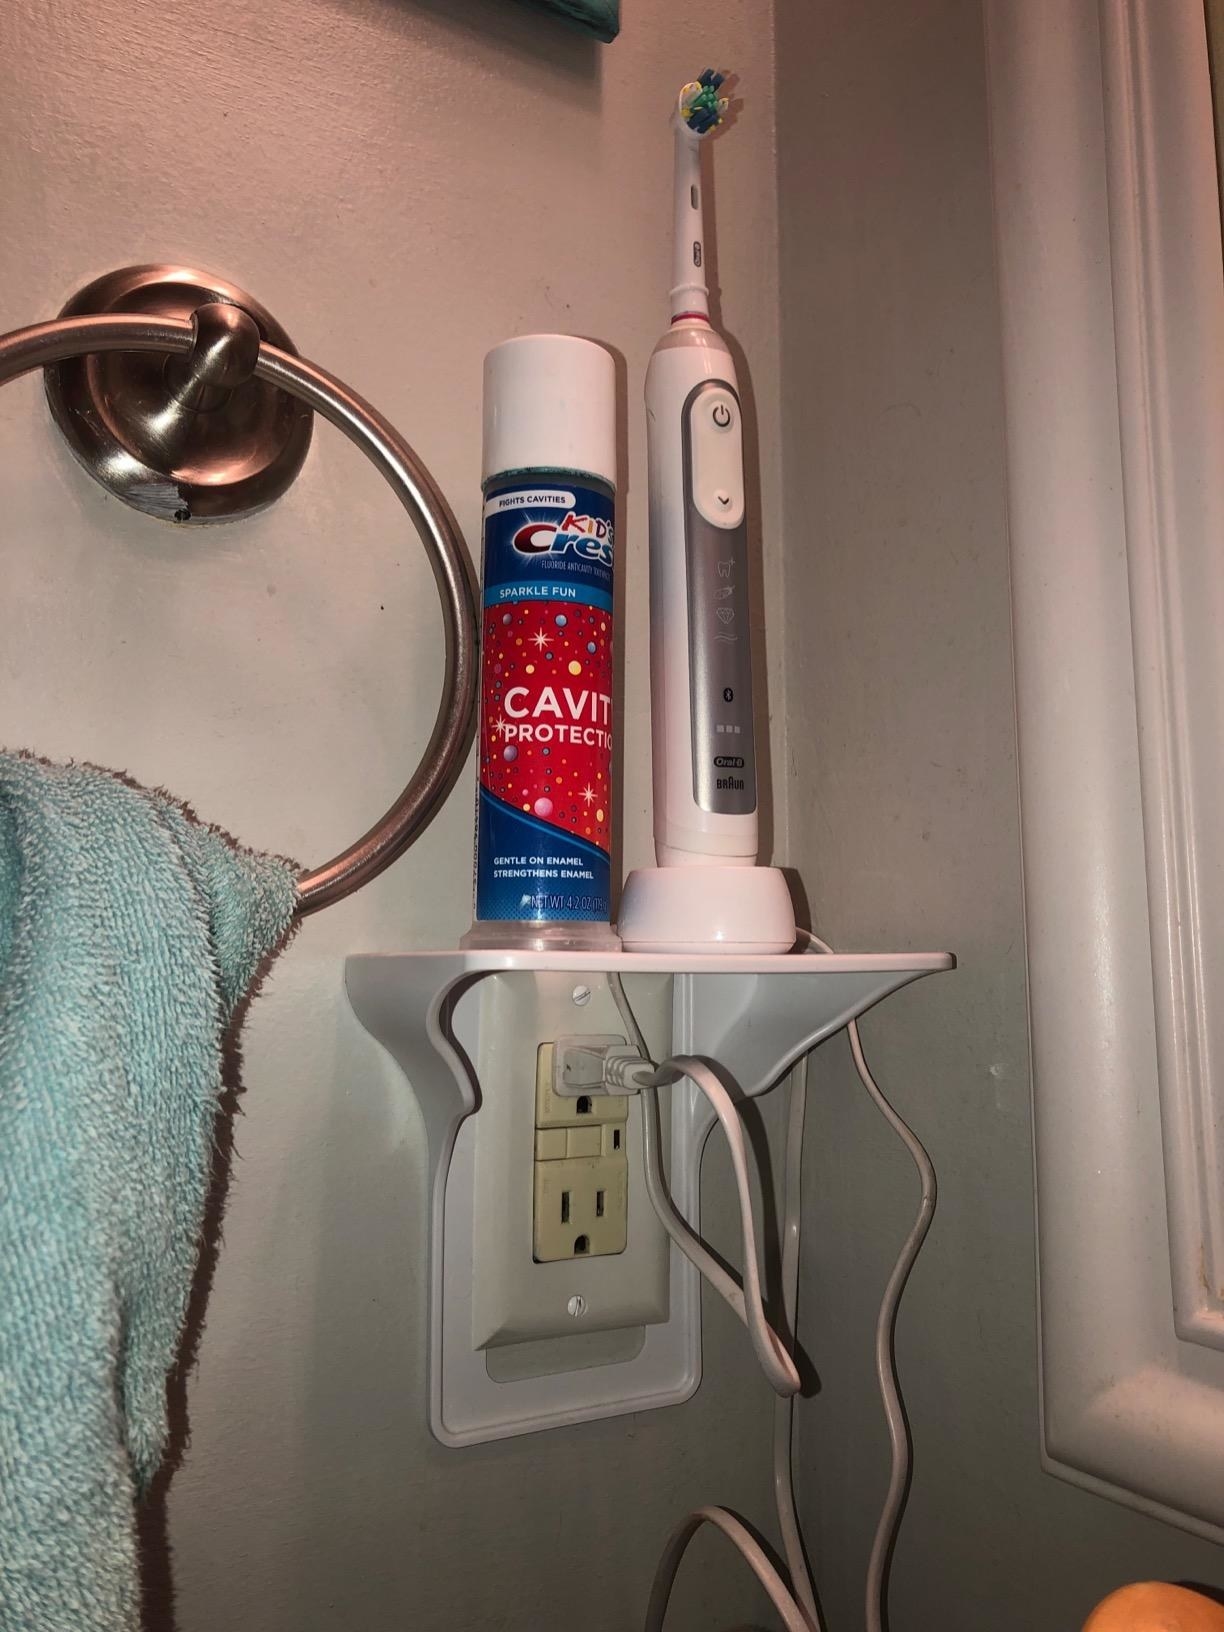 reviewer pic of outlet shelf with an electric toothbrush and toothpaste stored on it